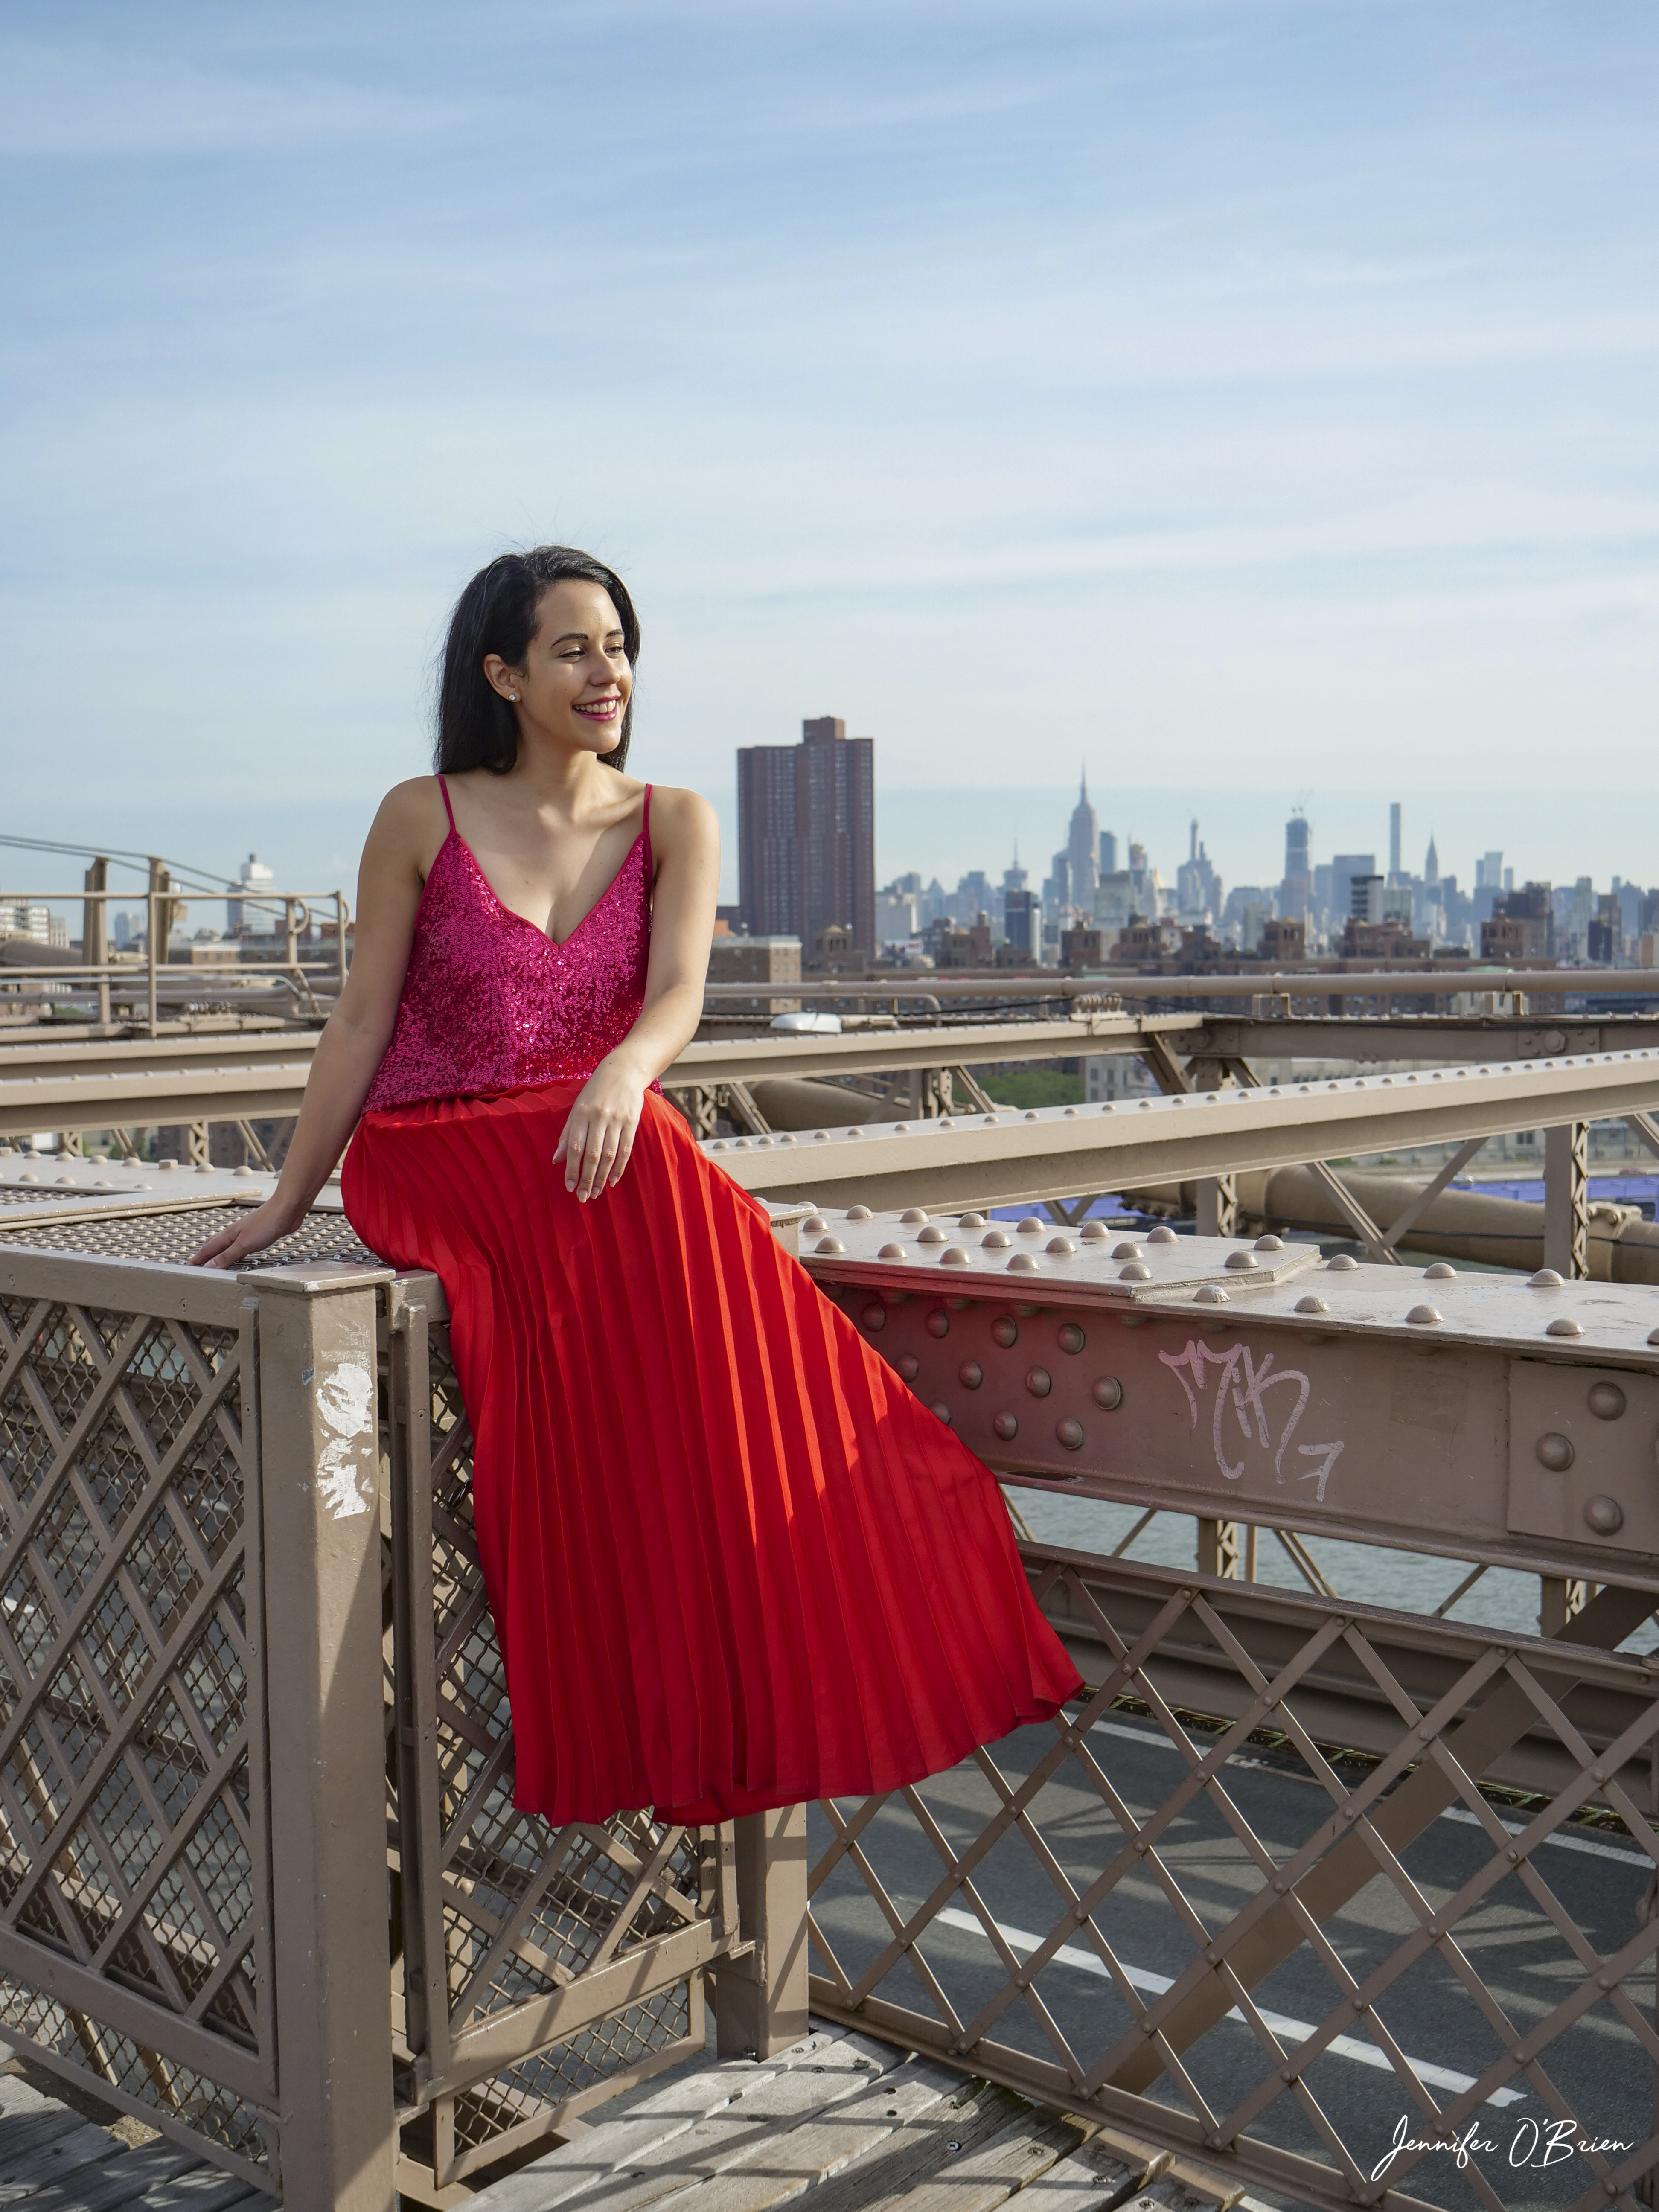 Top Instagram Photos of the Brooklyn Bridge The Travel Women Empire State Building girl in red